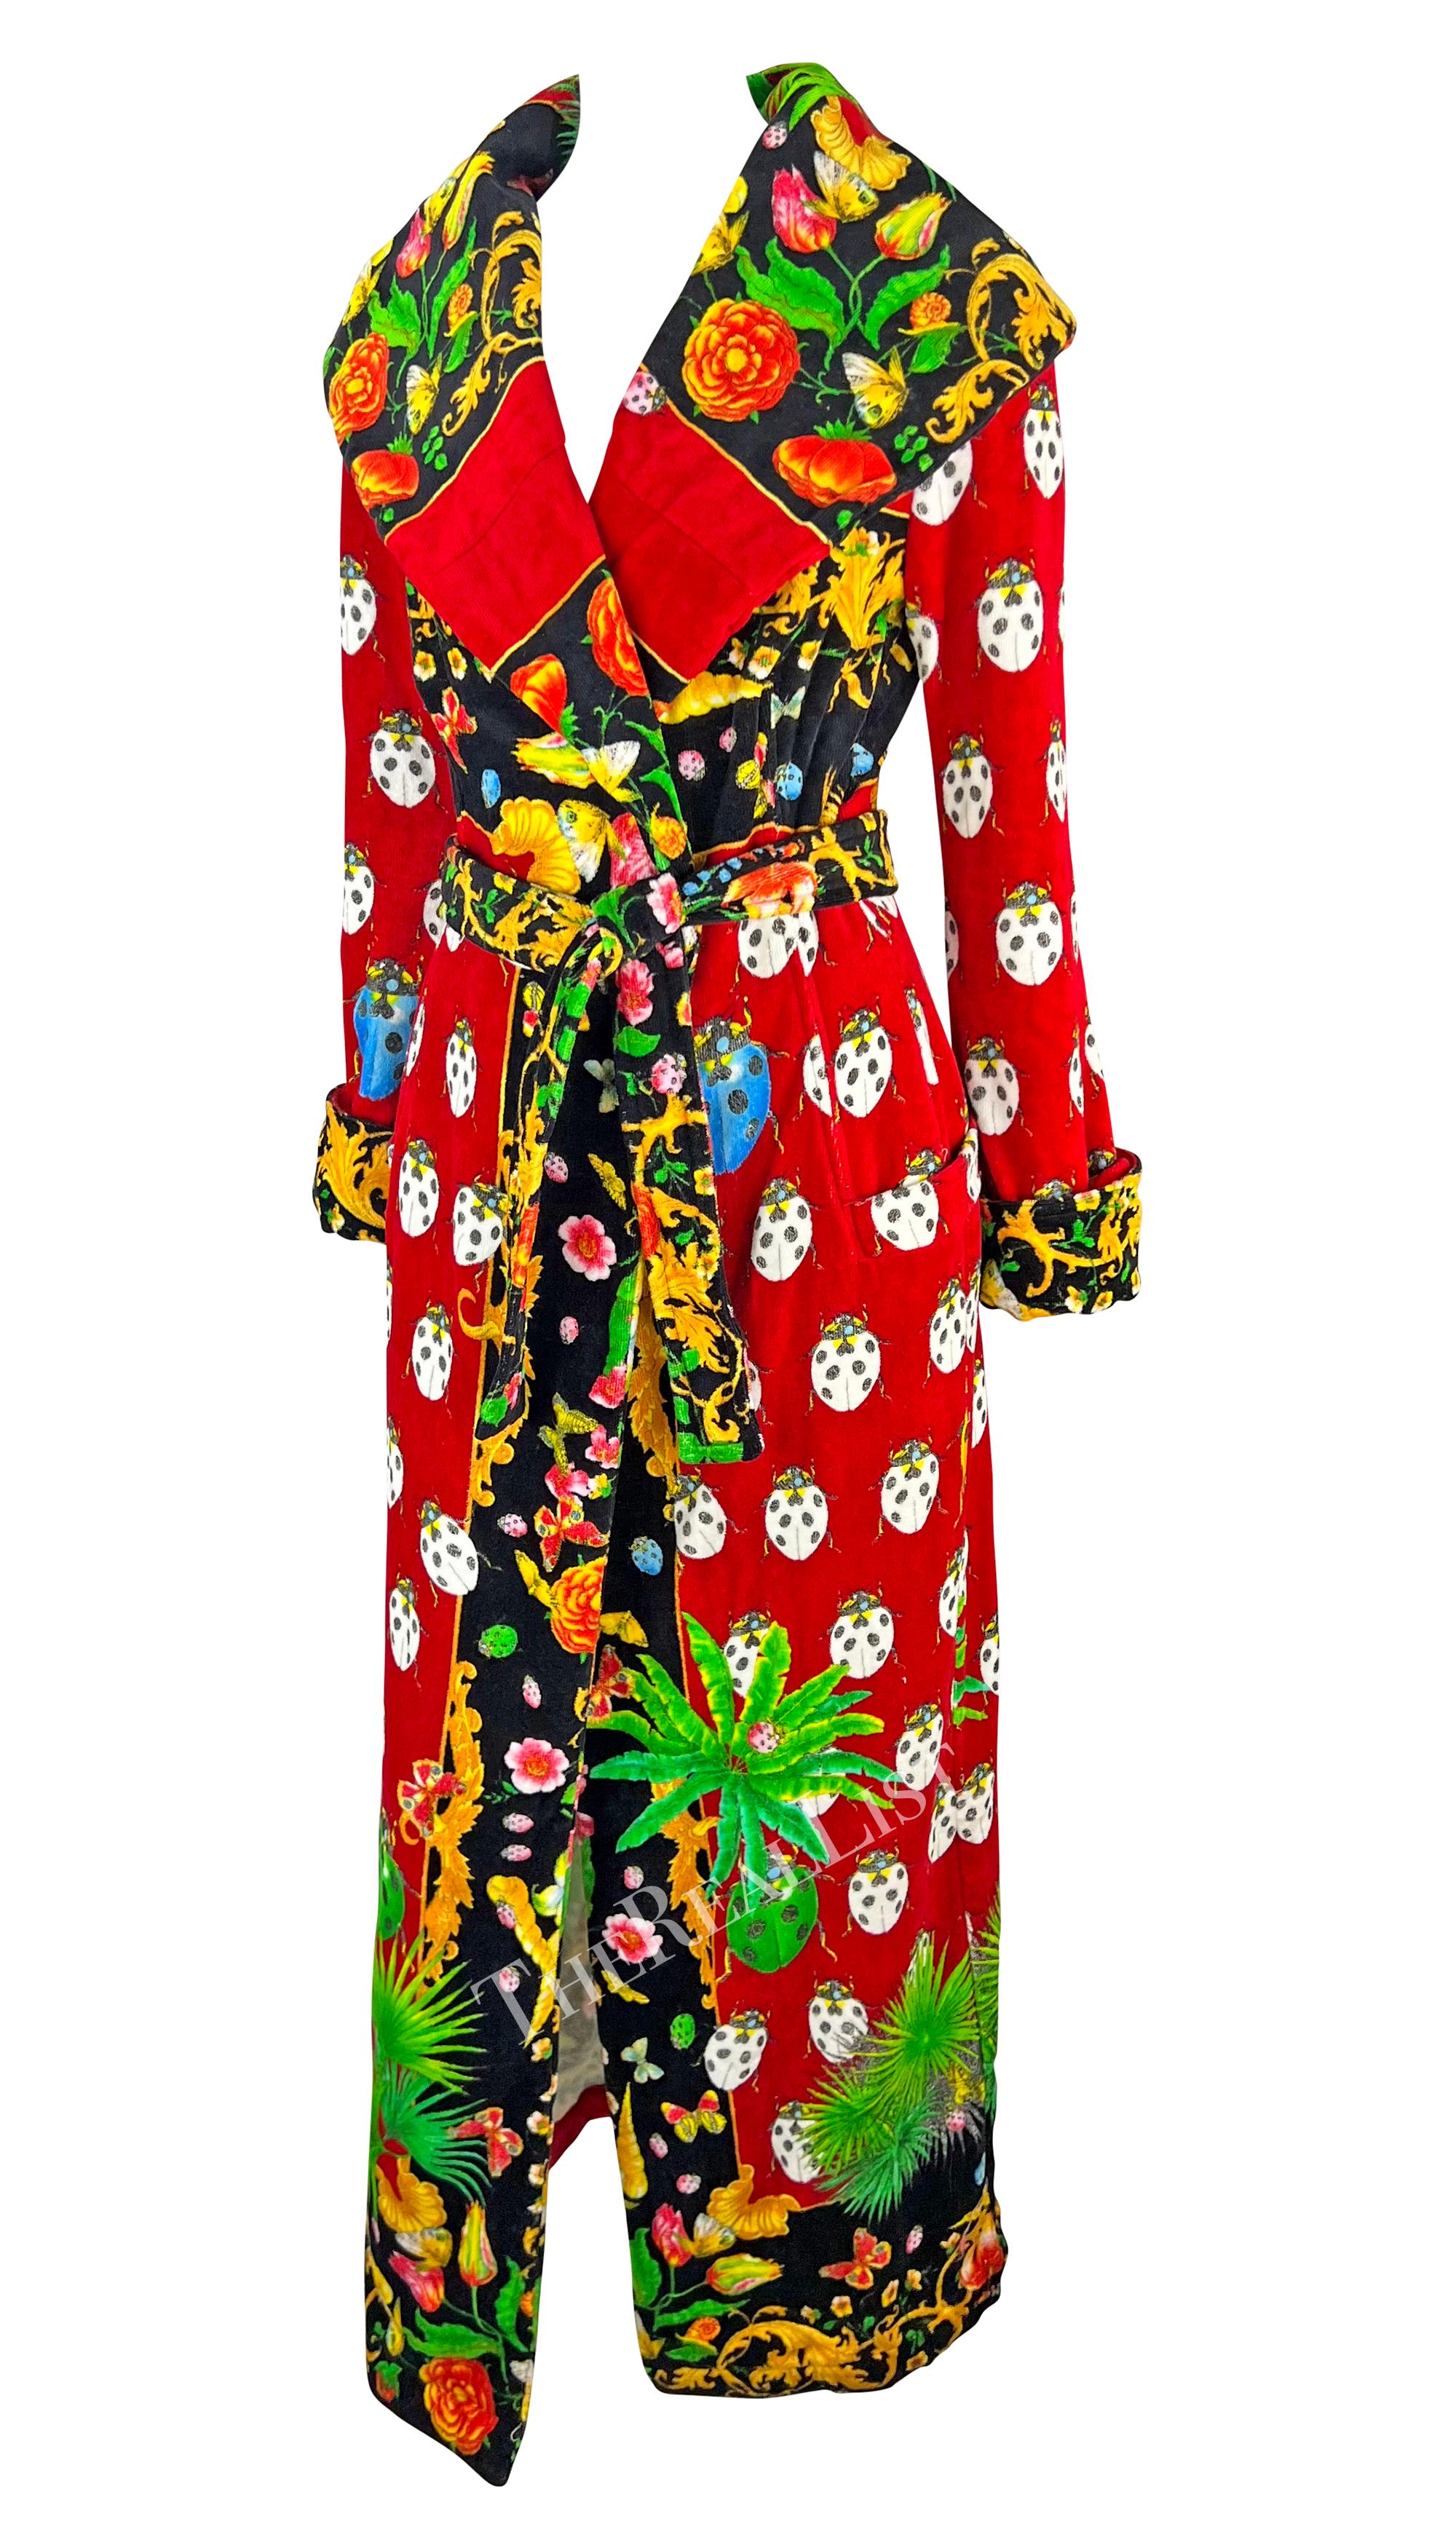 S/S 1995 Gianni Versace Red Lady Bug Print Corset Boned Terrycloth Robe For Sale 1